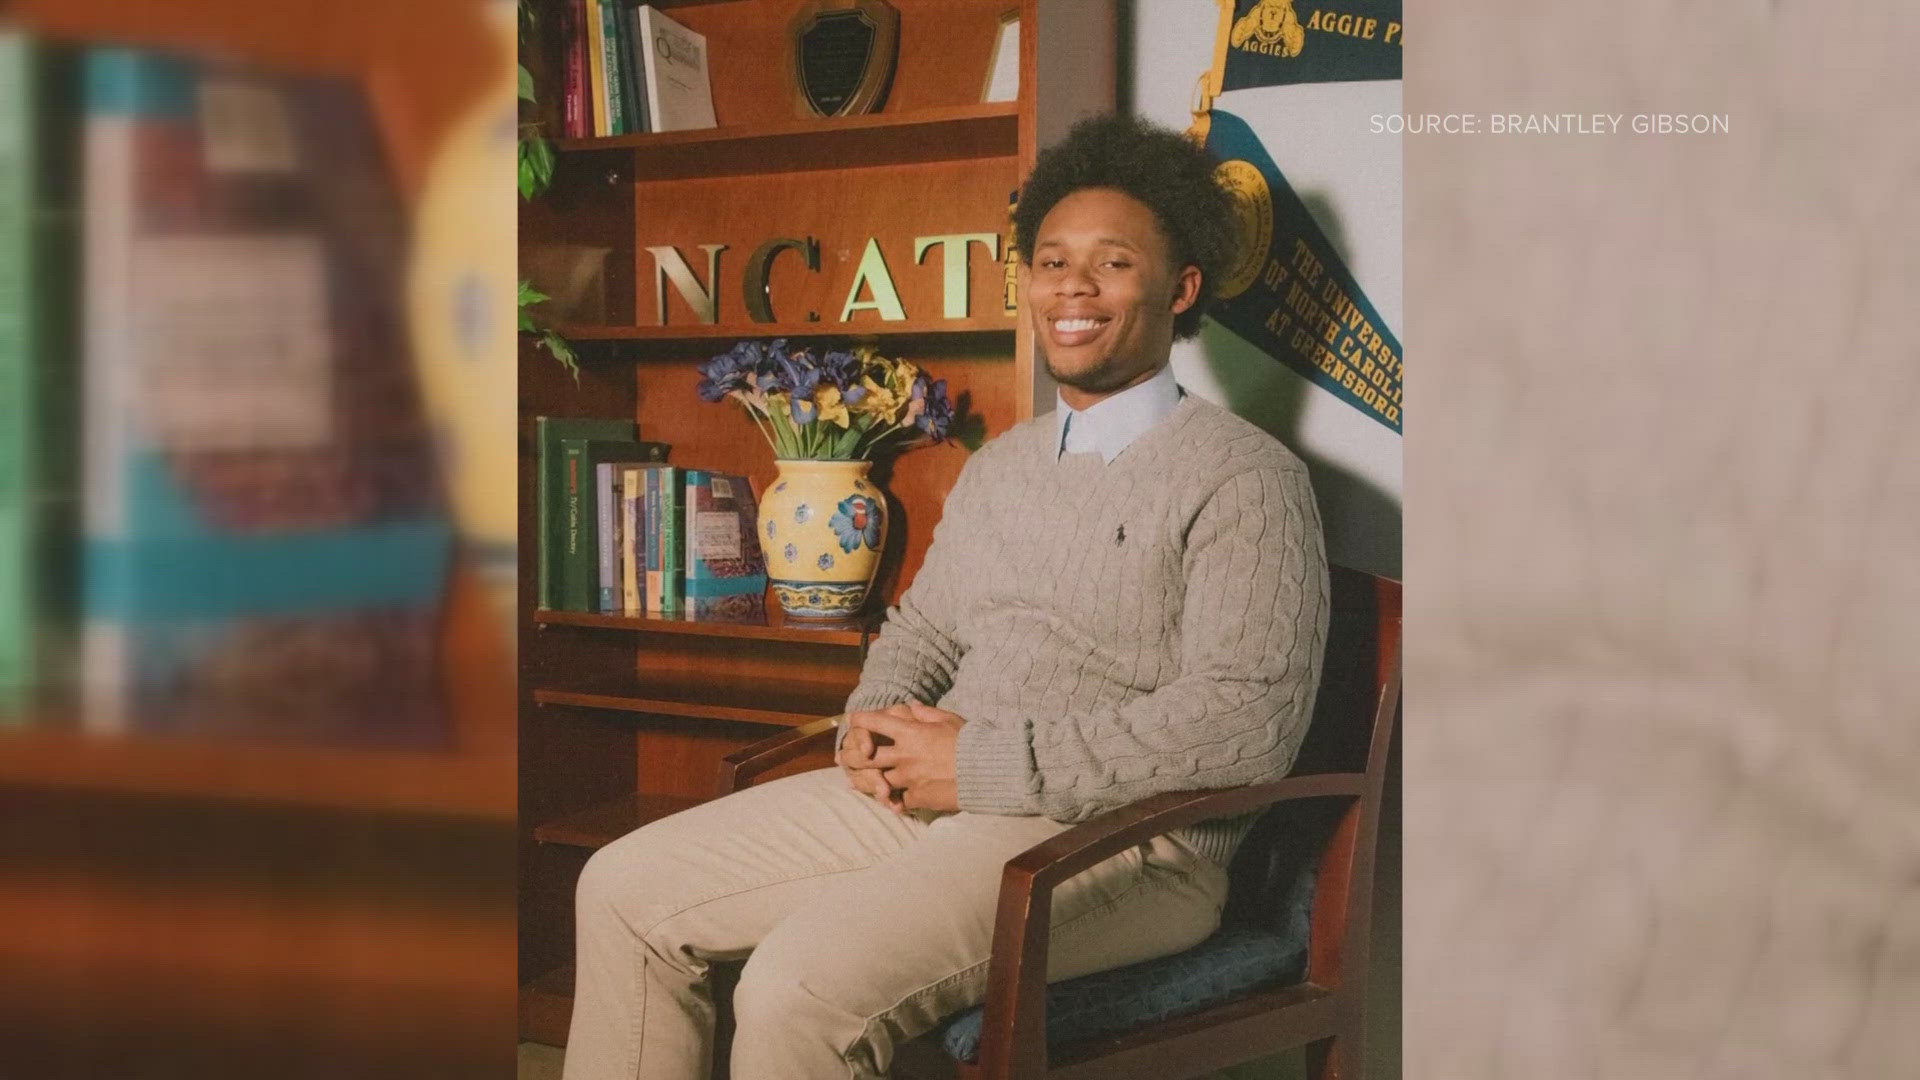 Rising NC A&T Senior, Caulin Avery, spoke out about Greensboro hit-and-run off South Eugene Street that injured 15 people earlier this year.